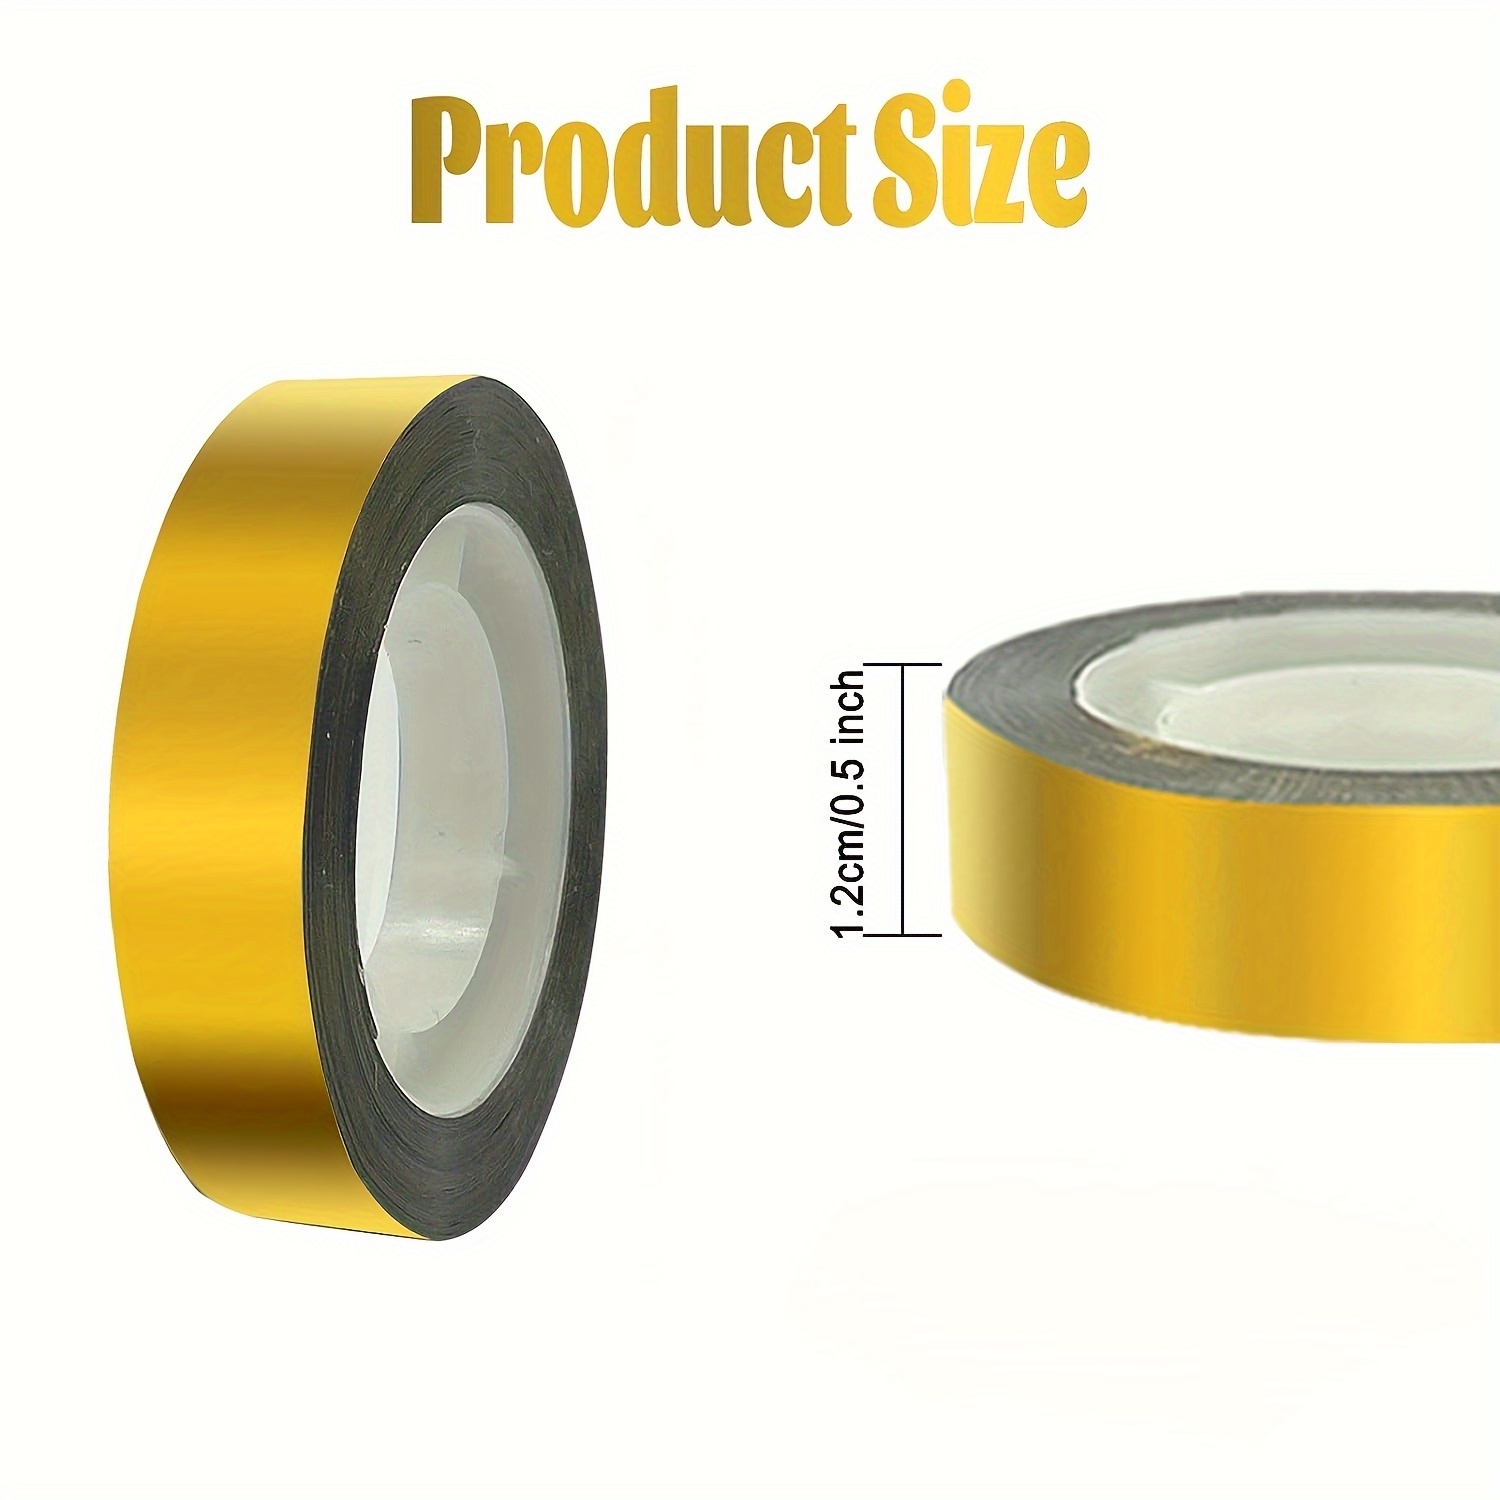 Nuanchu 3 Rolls Metalized Polyester Film Tape Gold Washi Tape Metallic Wall  Border Tape Silver Decorative Tape Black Adhesive Reflective Strips Mirror